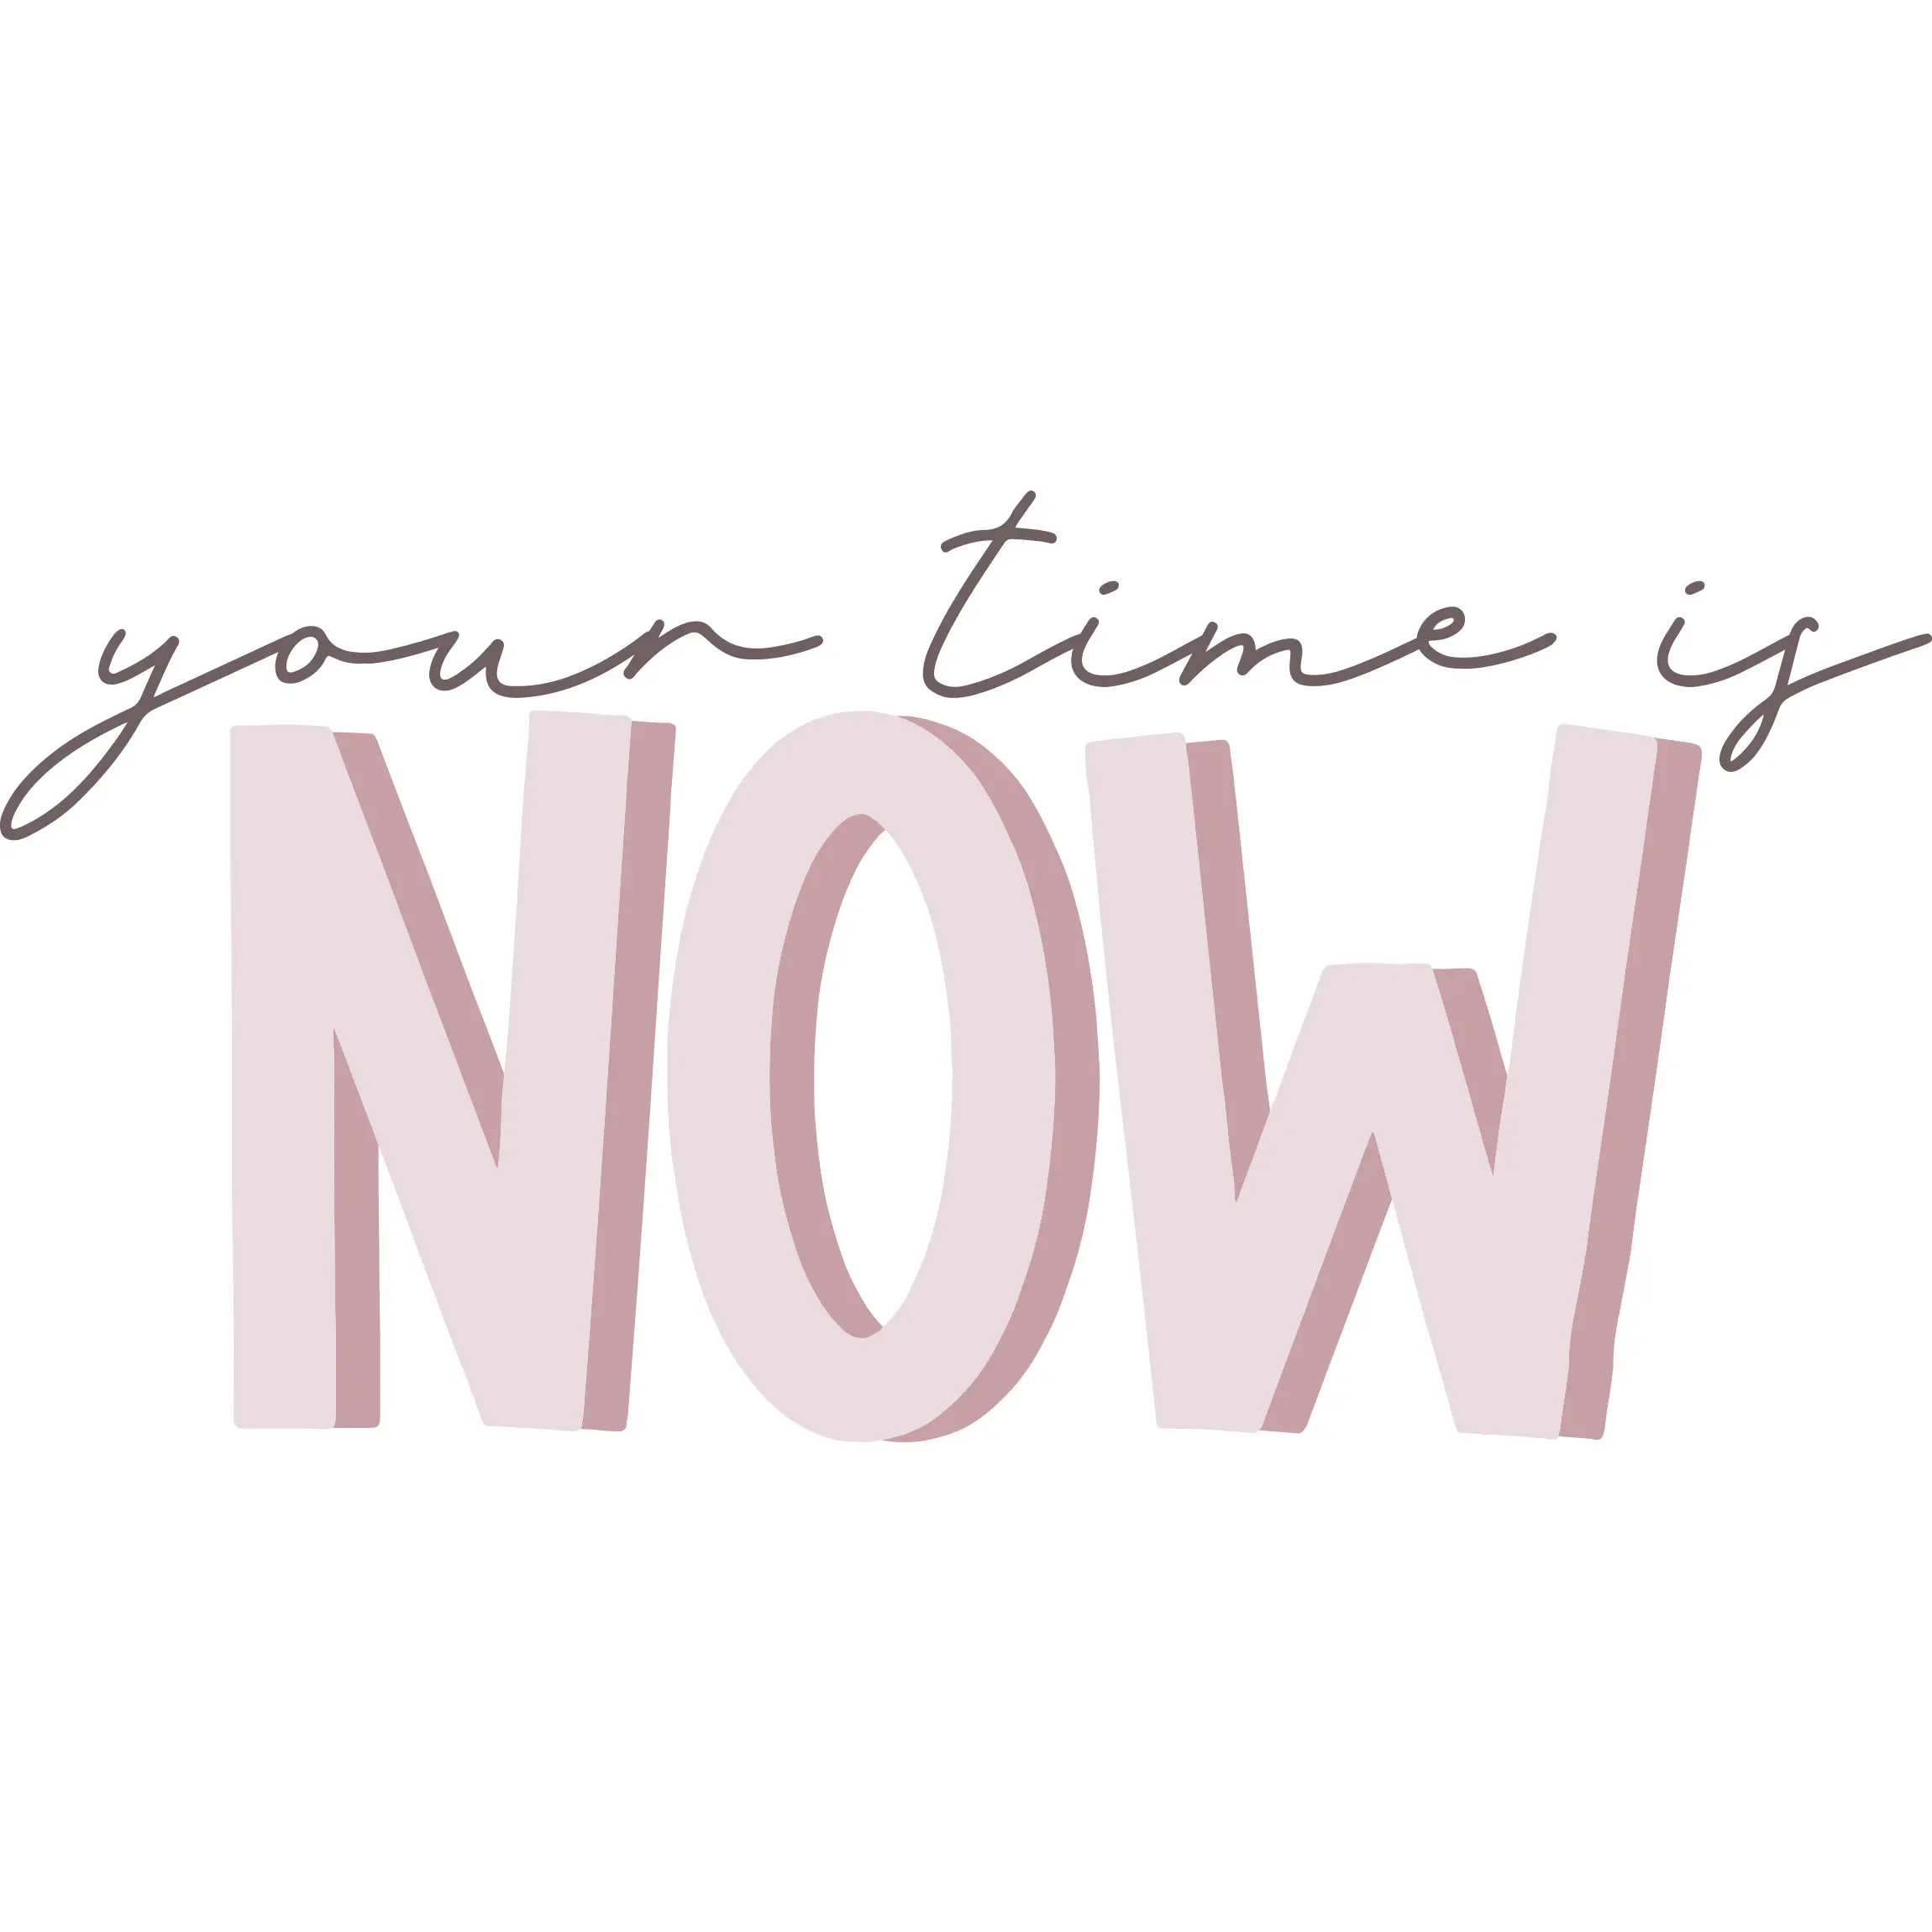 now is time Your